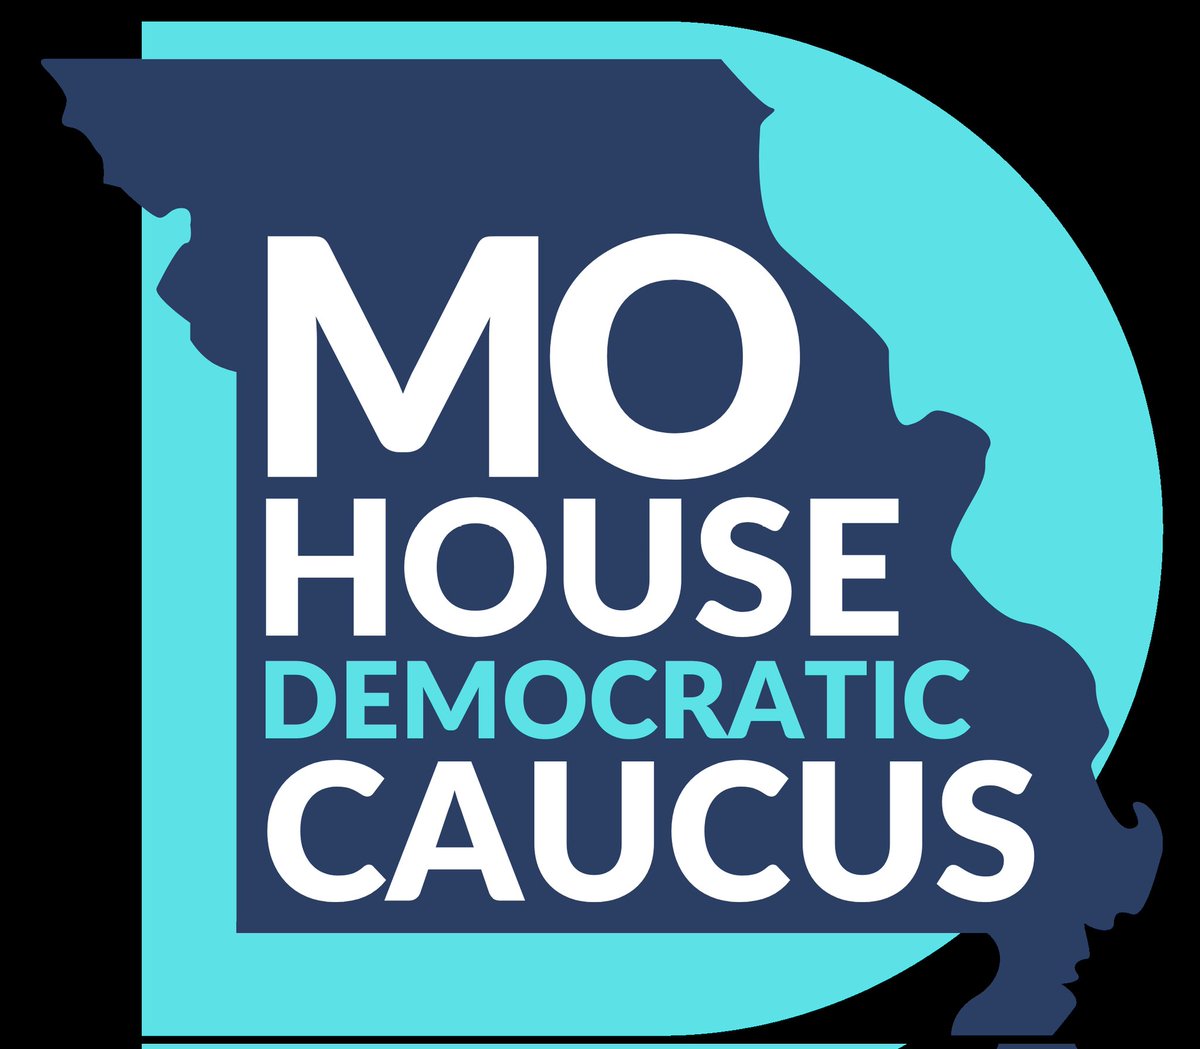 Just a reminder that our Democrat caucus is this Thursday, April 18, 2022 beginning at 7:00 p.m. at the Minnie Hackney Community Center, 110 South Main Street, Joplin. #SWMODems #DemocratCaucus2024 #Yourvotematters
#VoteBlueDownBallot